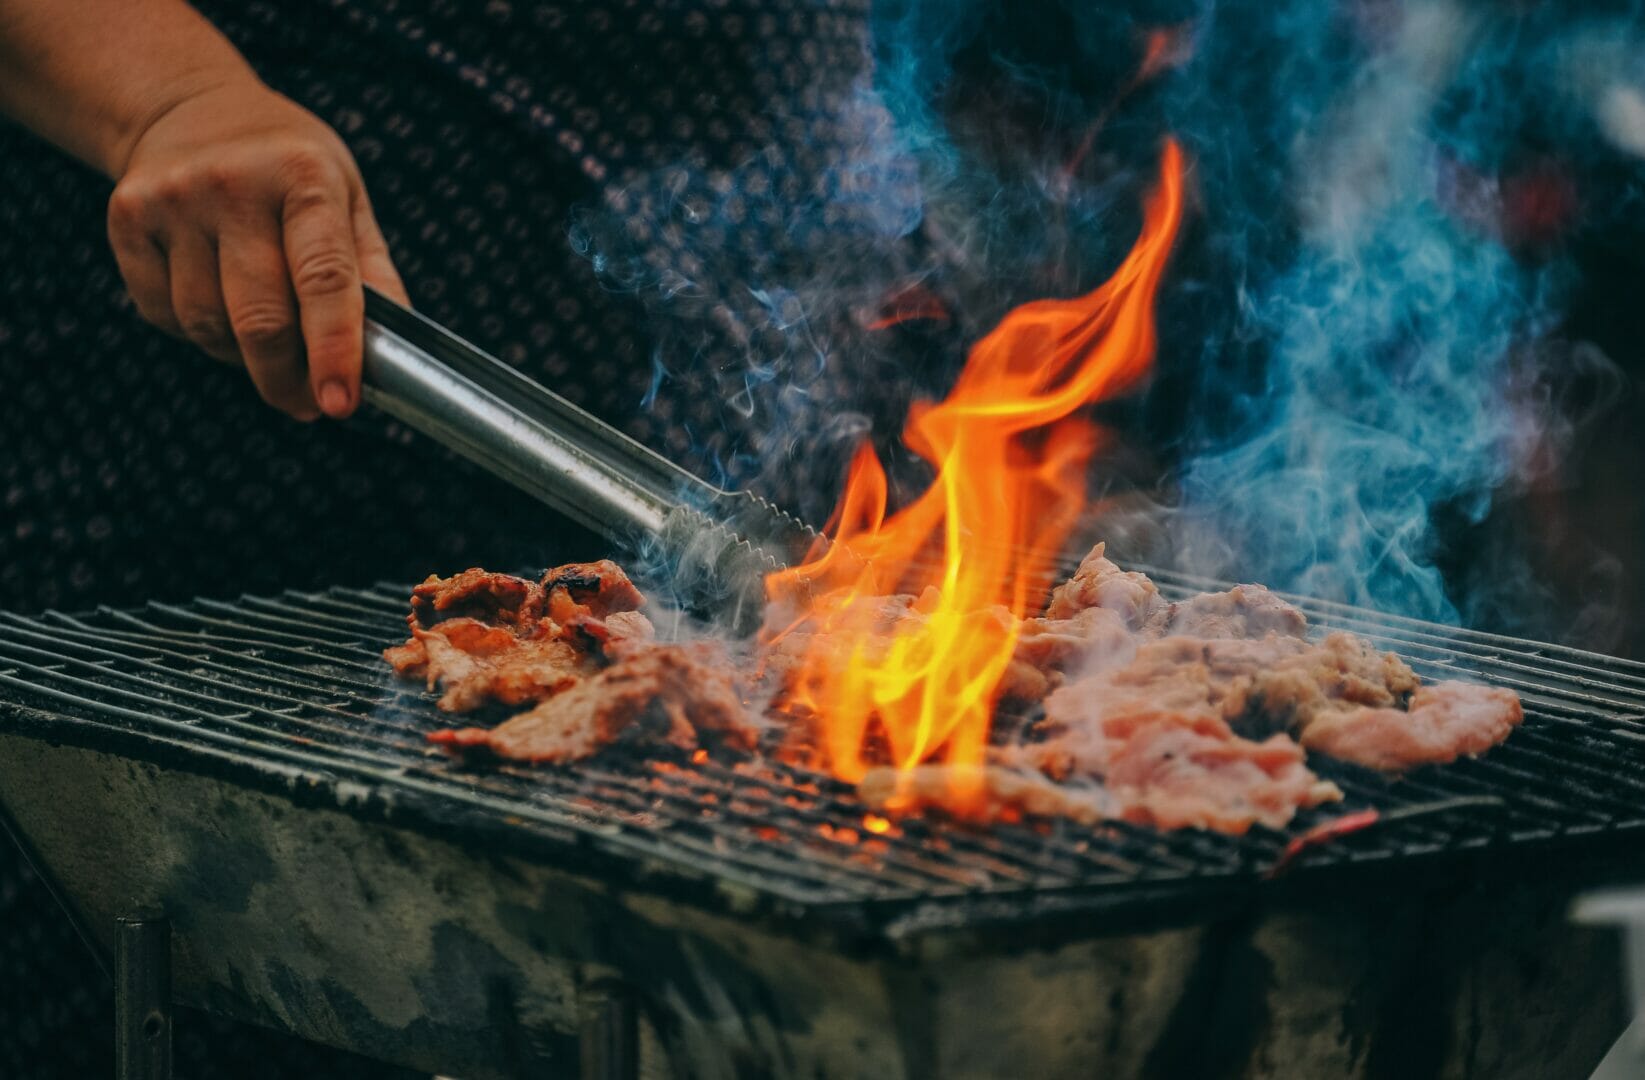 Fancy Going Plant-Based This BBQ Season? Here’s How You Can Do It